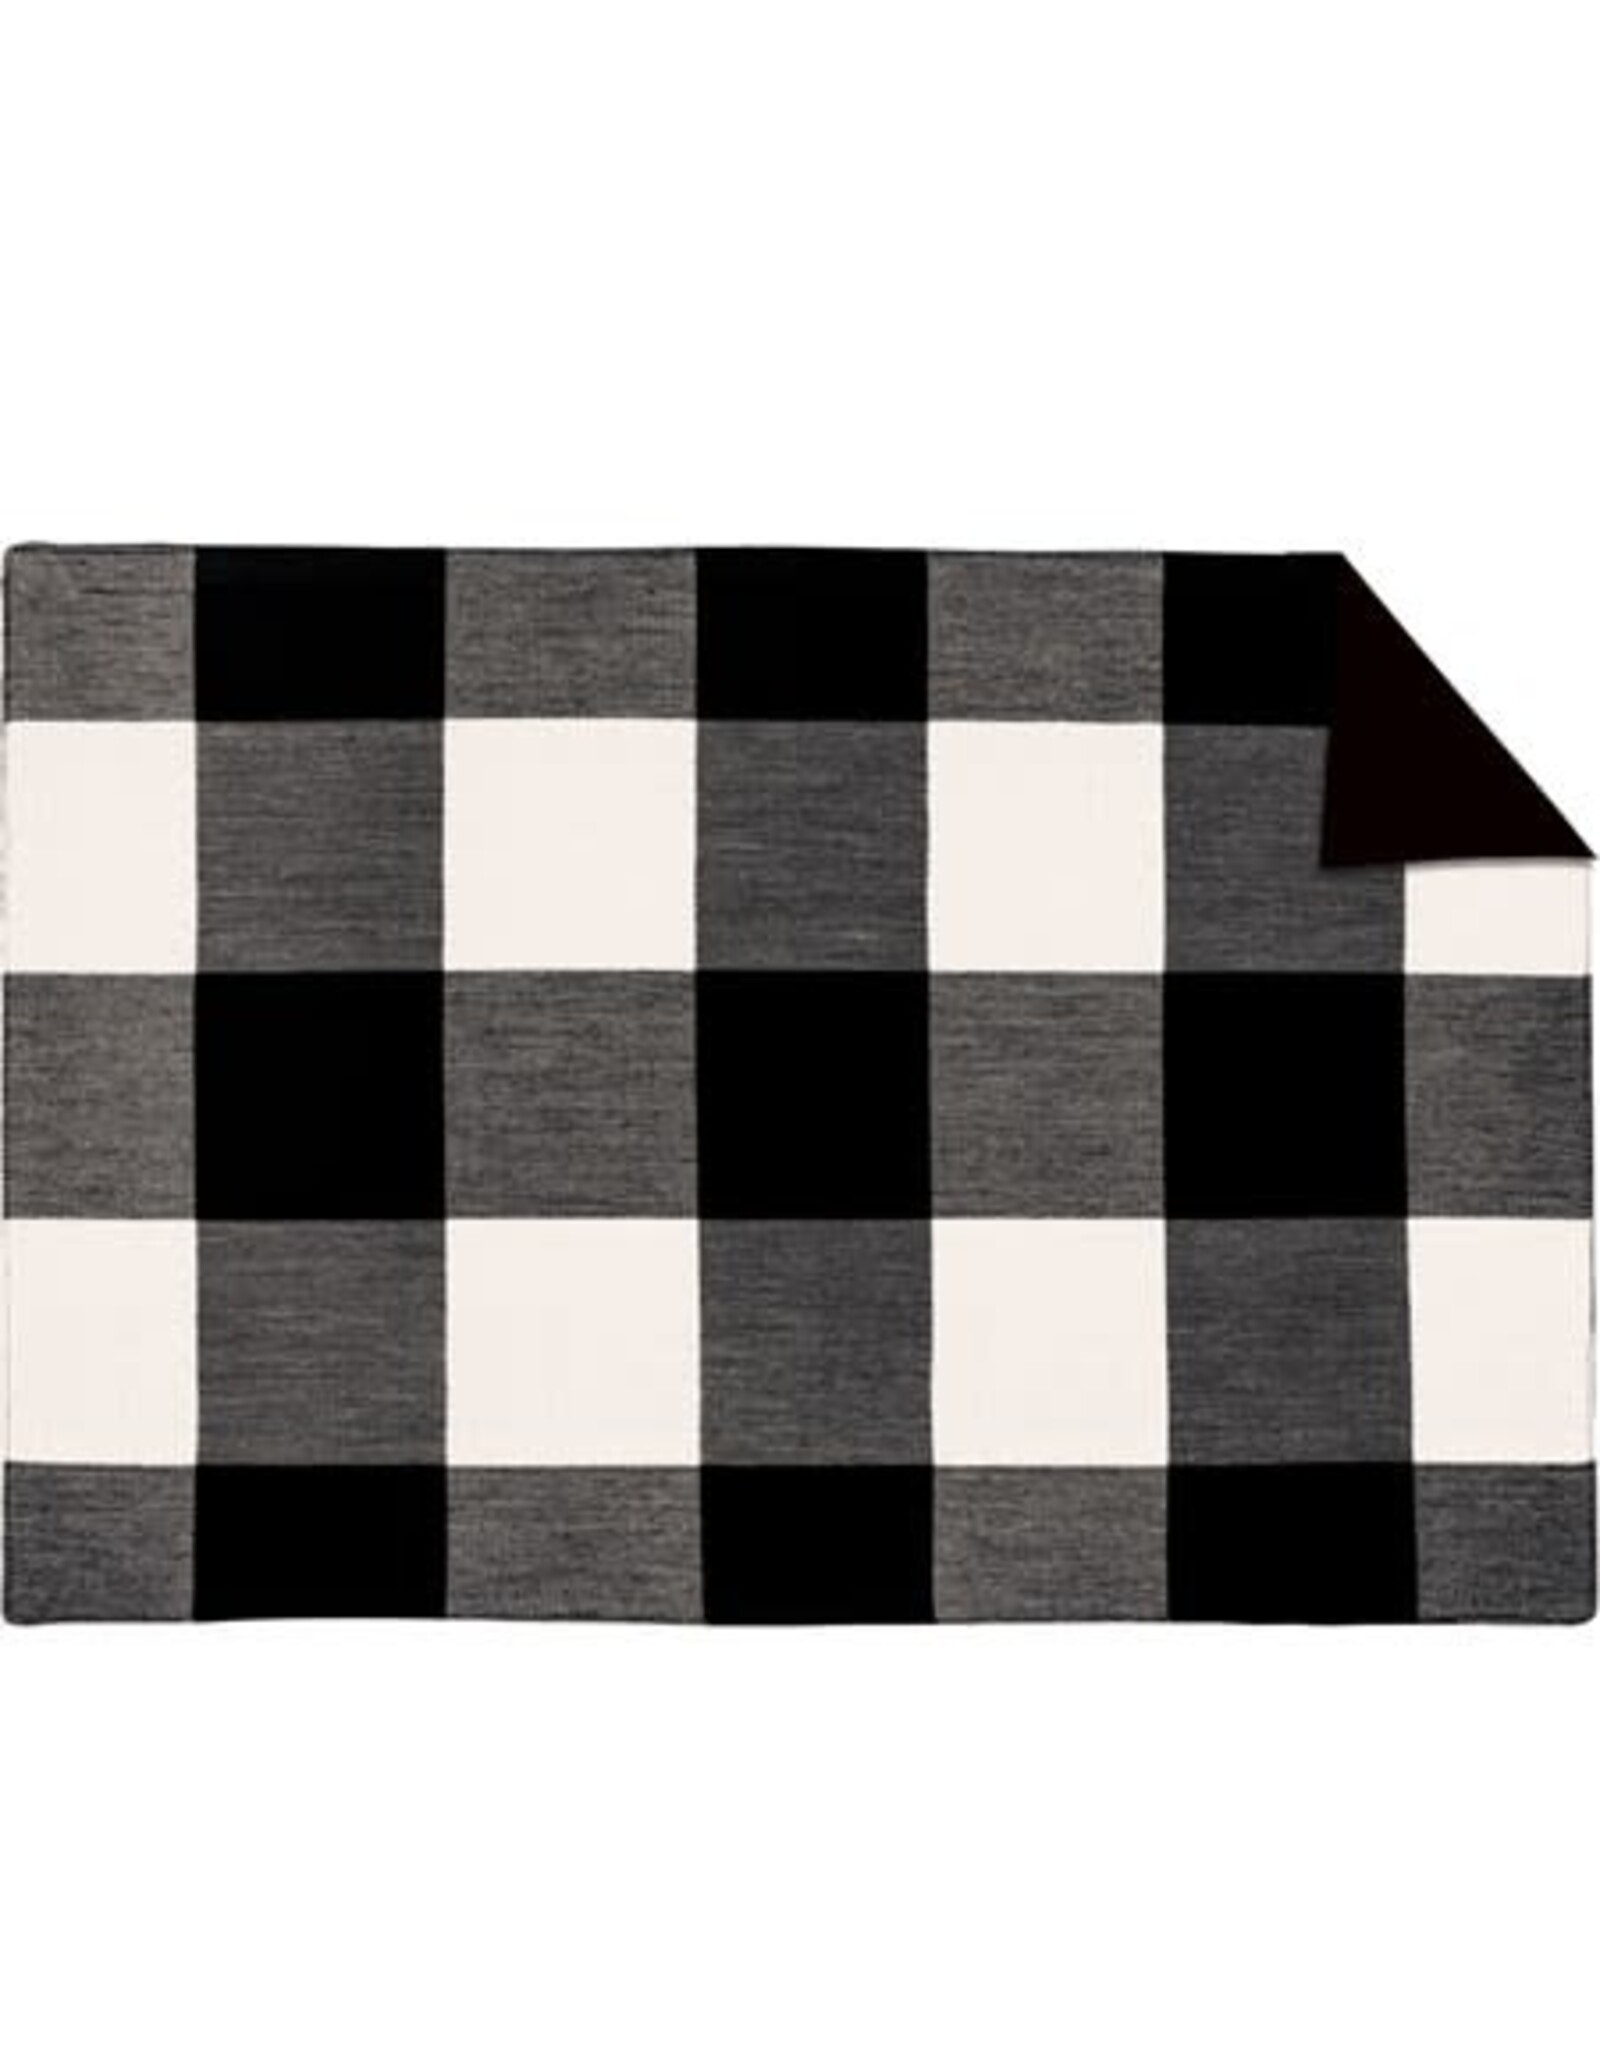 108746 Placemat Blk Buff Check